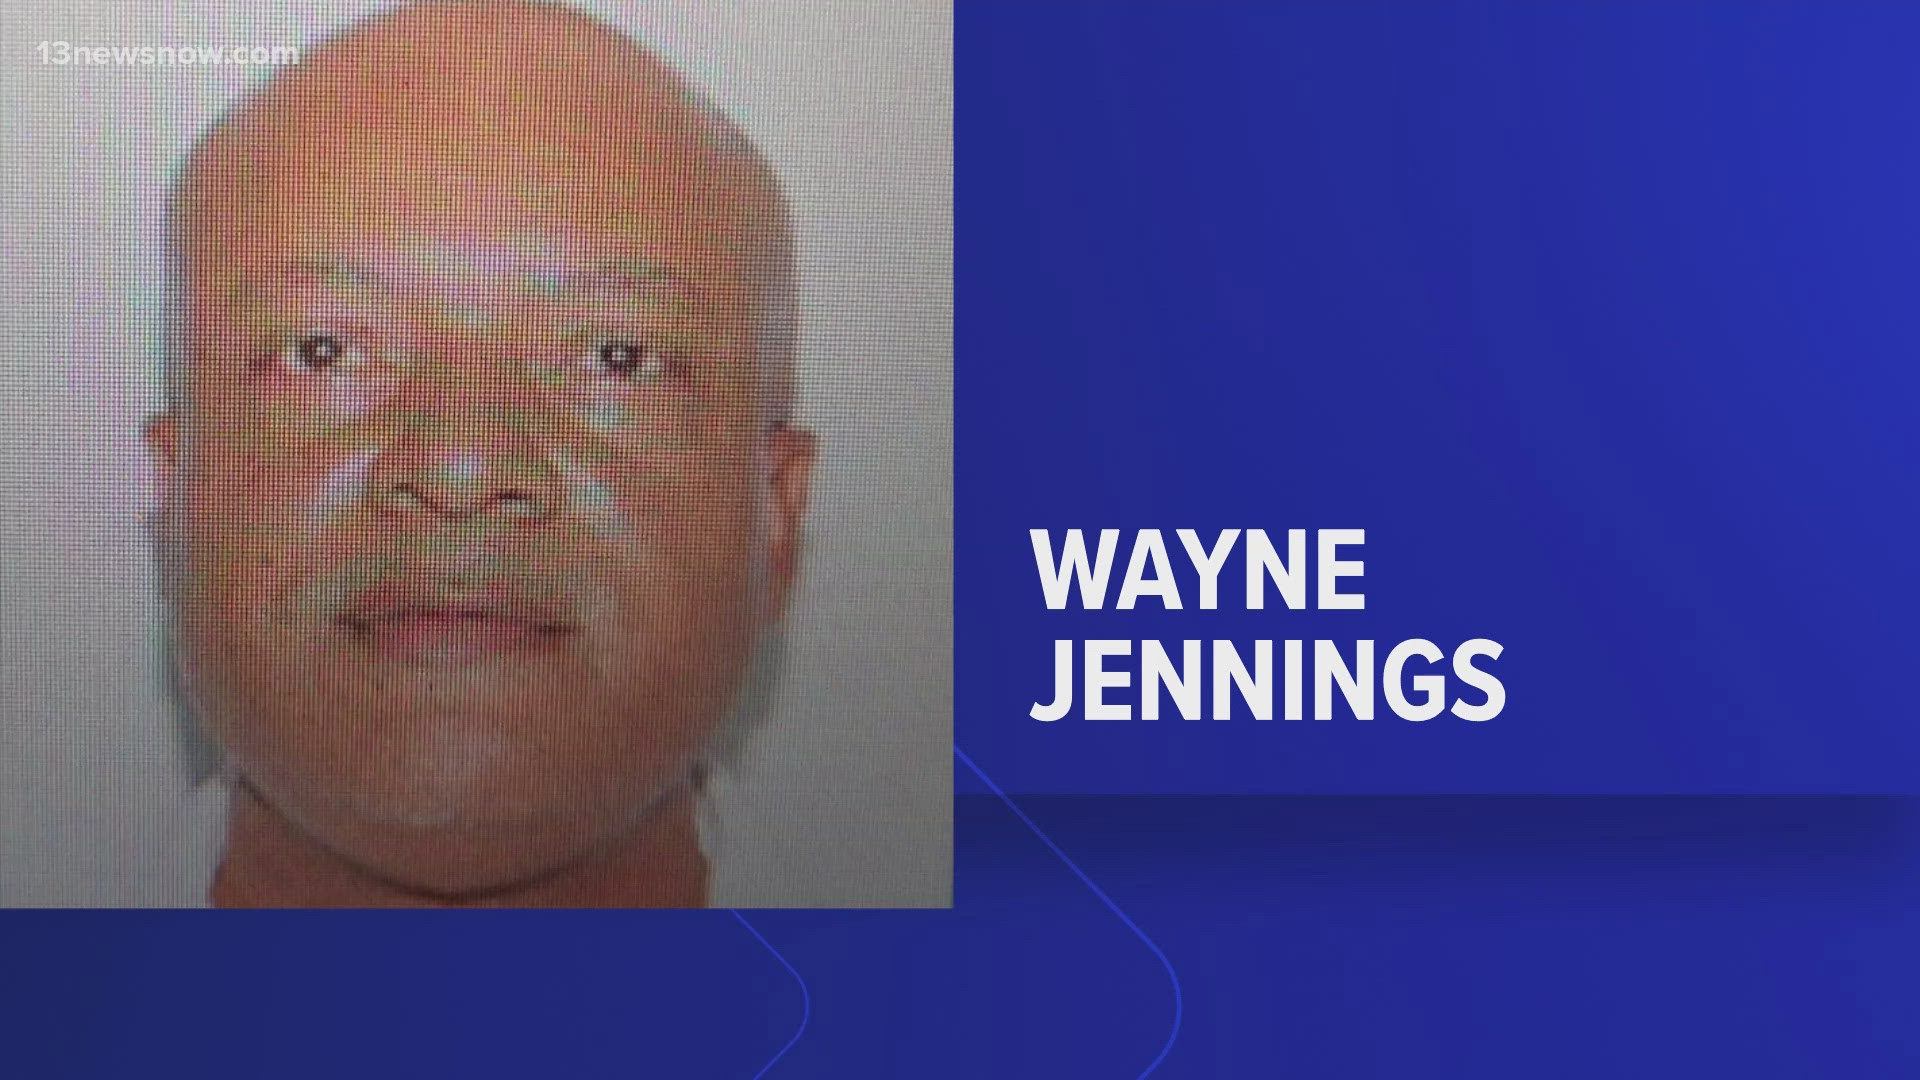 No one has seen 60-year-old Wayne Jennings in about four hours.